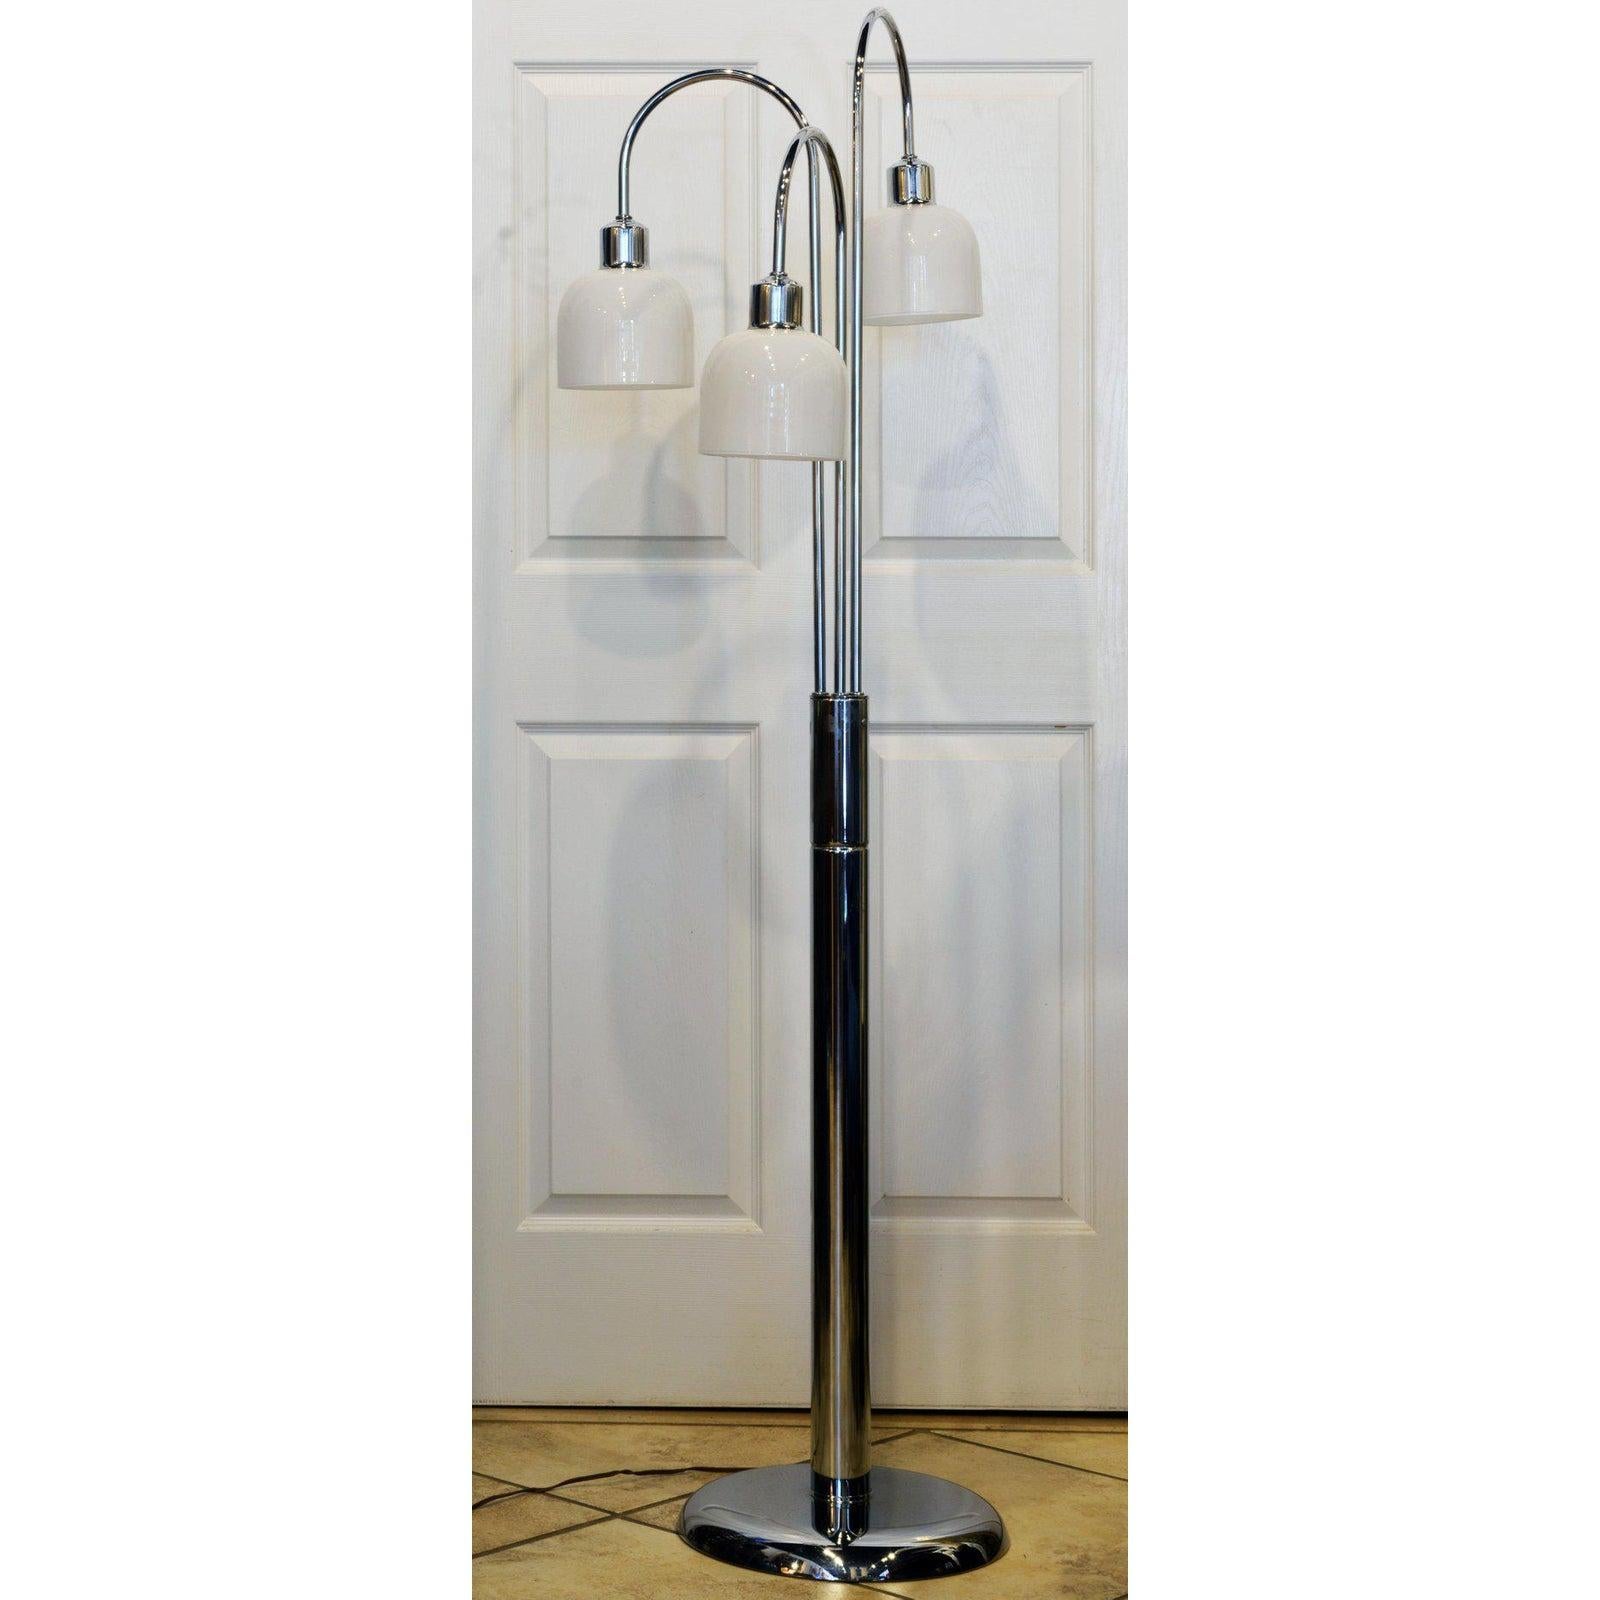 This midcentury chrome floor lamp in the Robert Sonneman style features three arched light arms with handblown milk glass shades set on a central stem with switch on a heavy domed base. The glass shades are easily detachable.